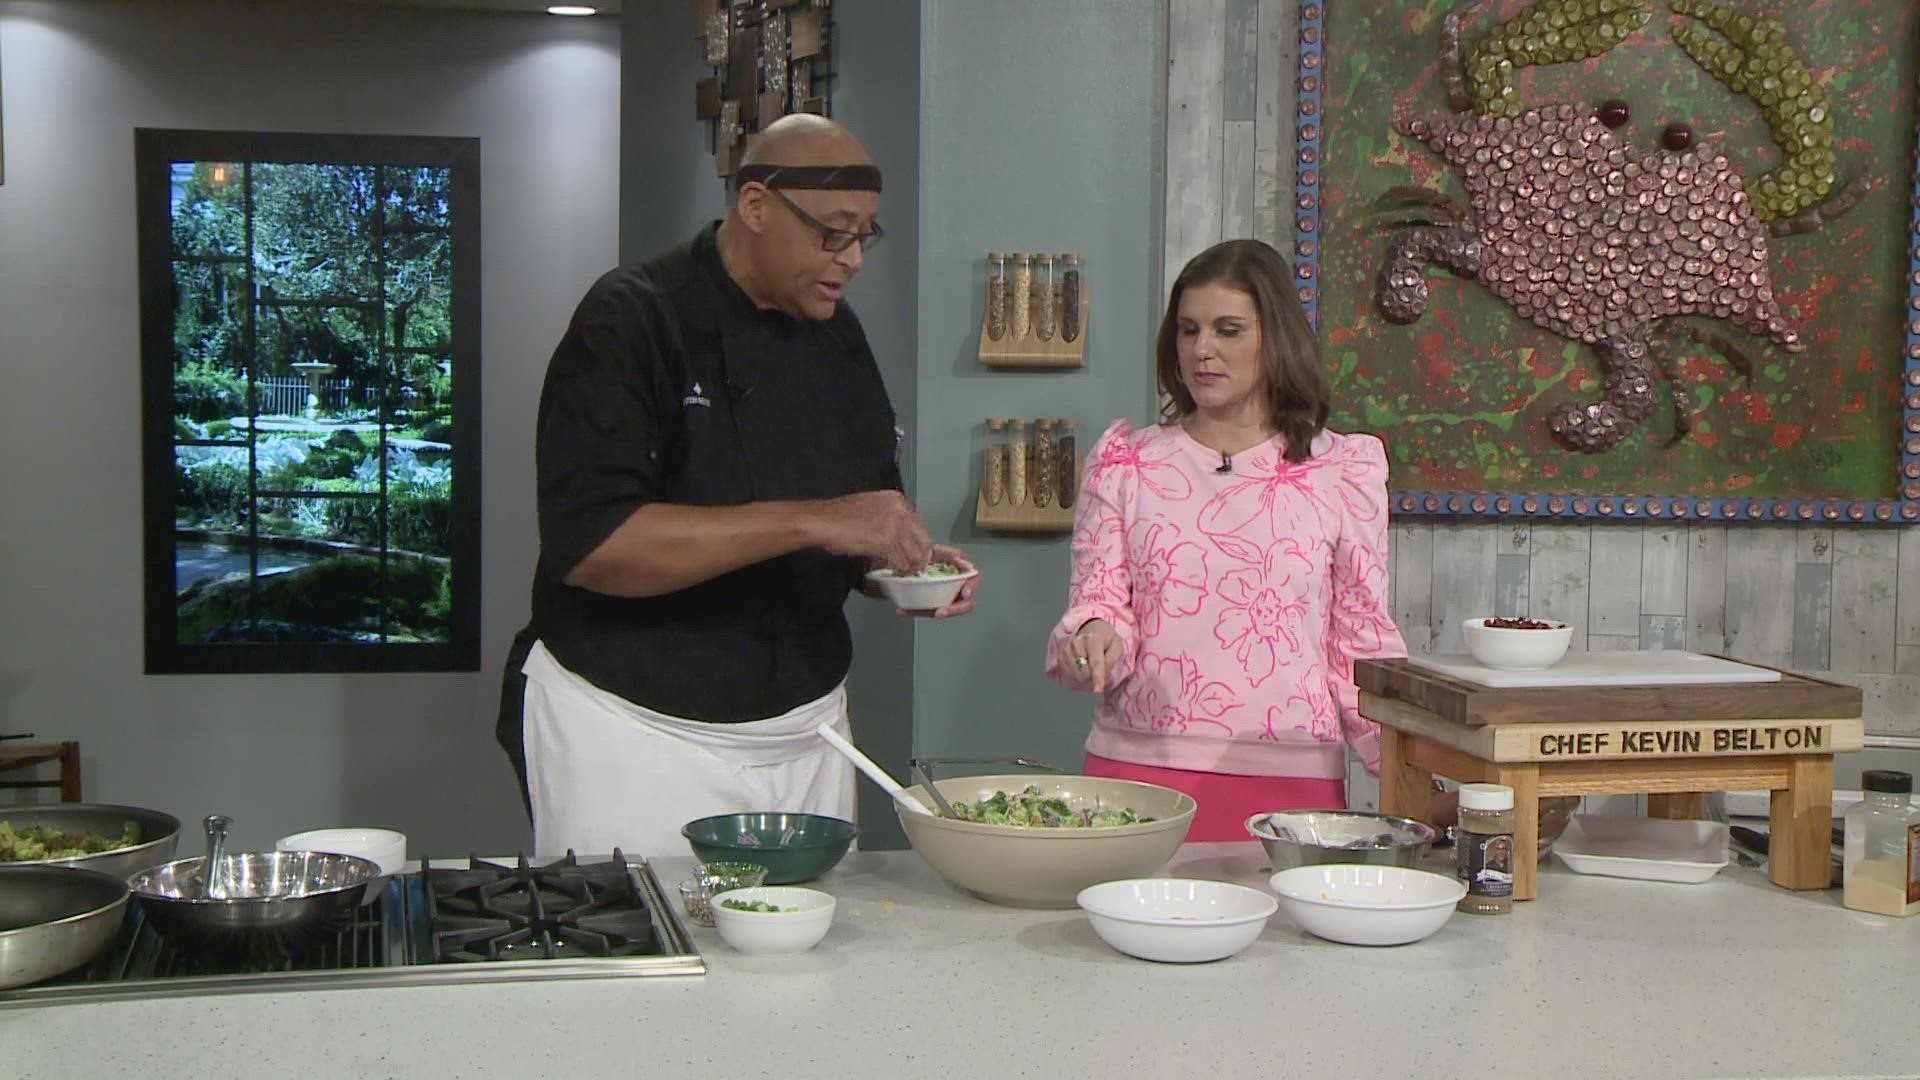 Chef Kevin Belton in the kitchen cooking up Broccoli Buddha Bowl with Beef.